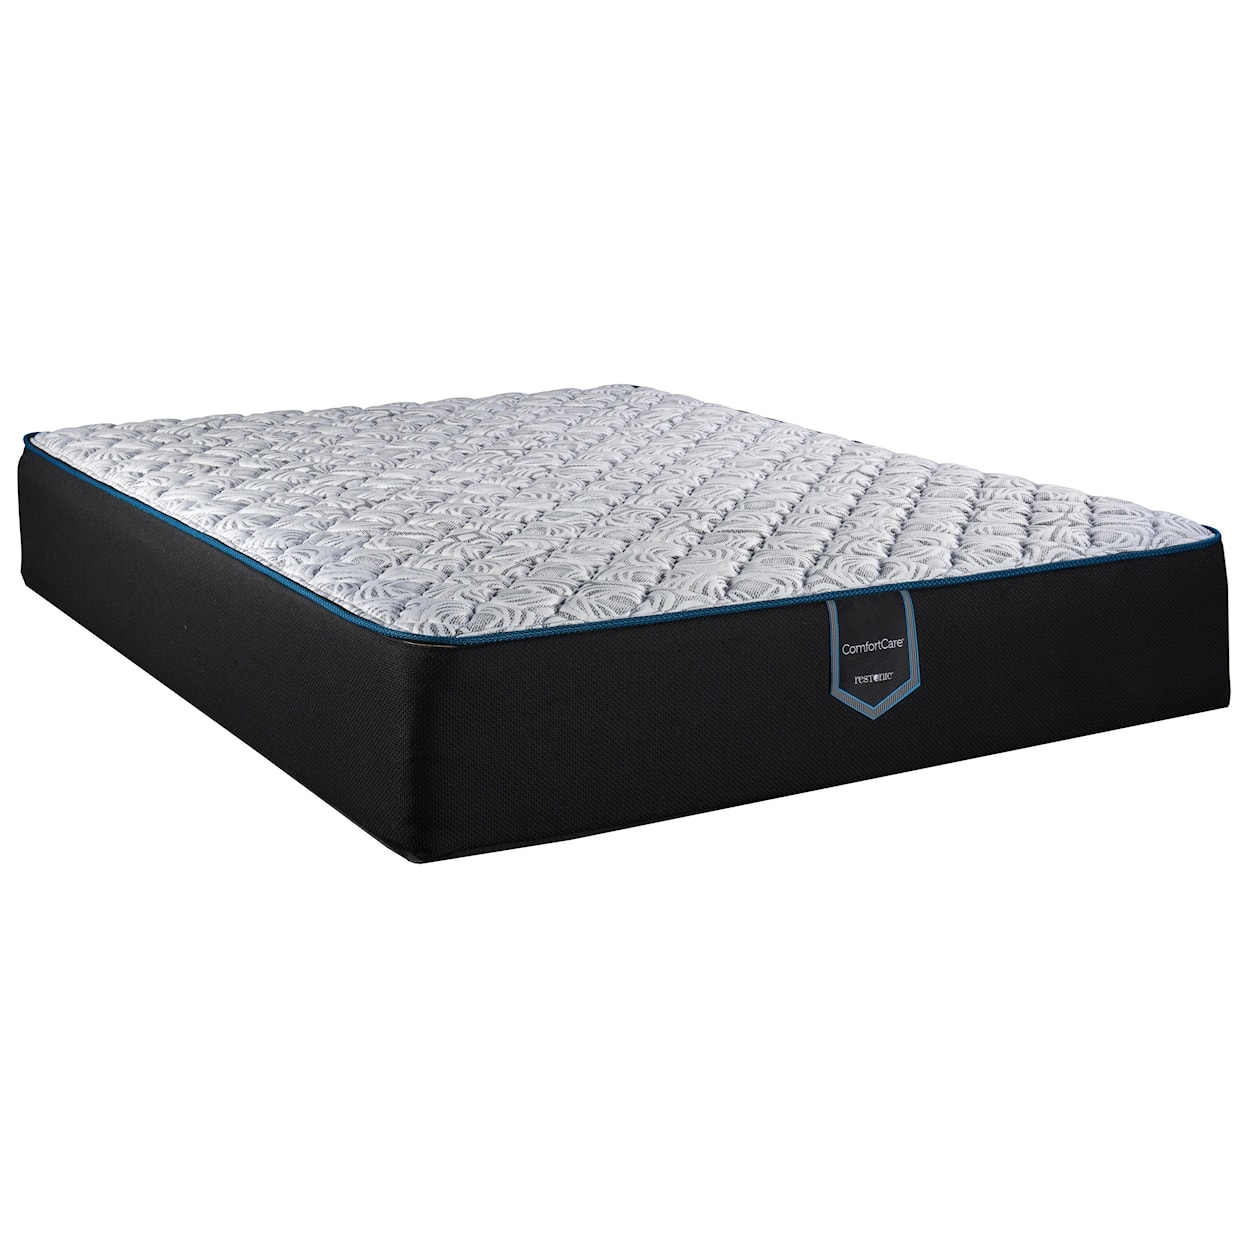 Restonic Arcadia Supreme Extra Firm King 13" Extra Firm Mattress